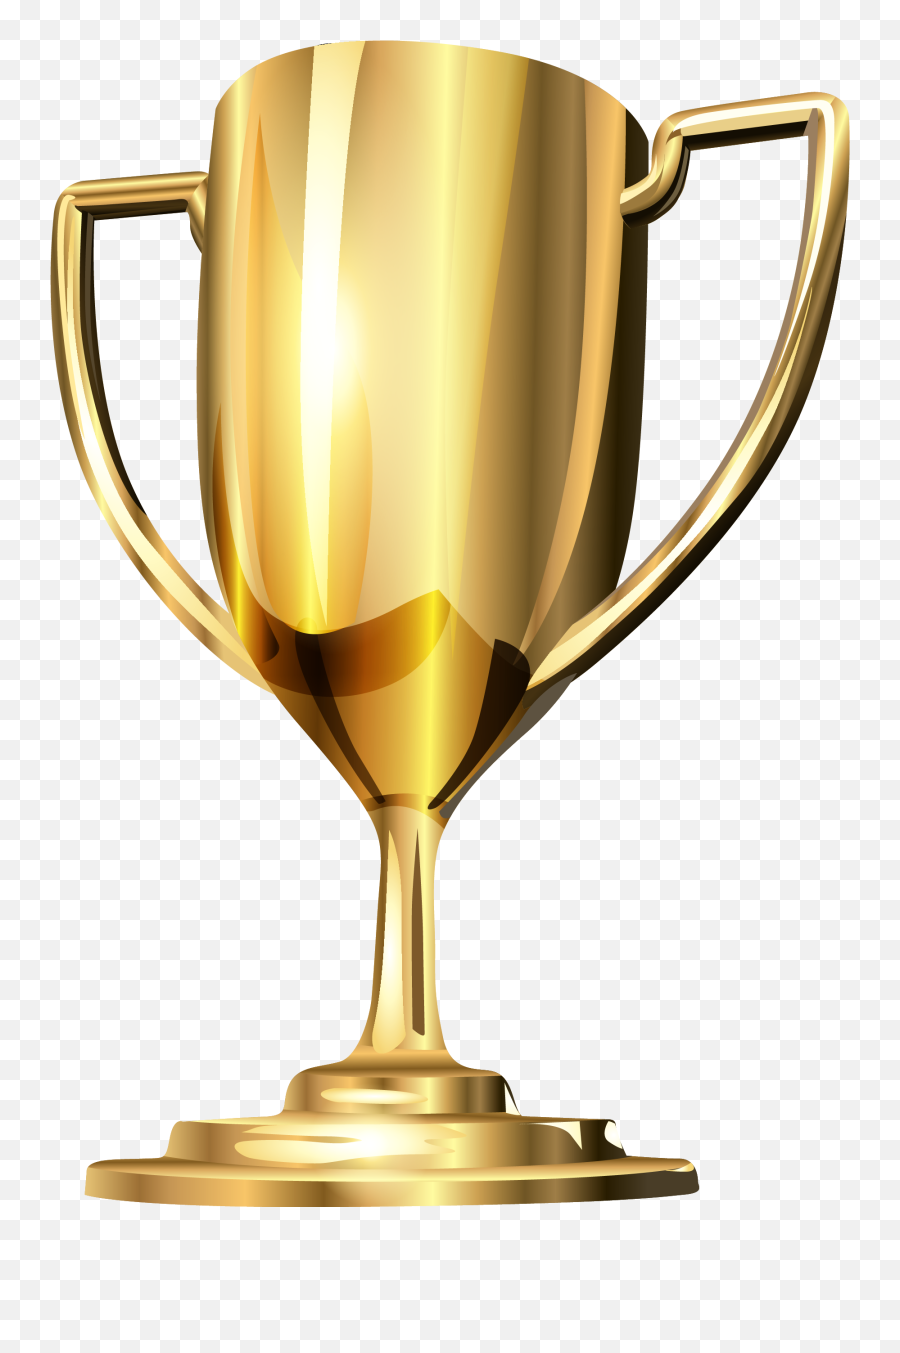 Gold Cup Trophy Png Image For Free Download - You Deserve Some Accolades,Trophy Png